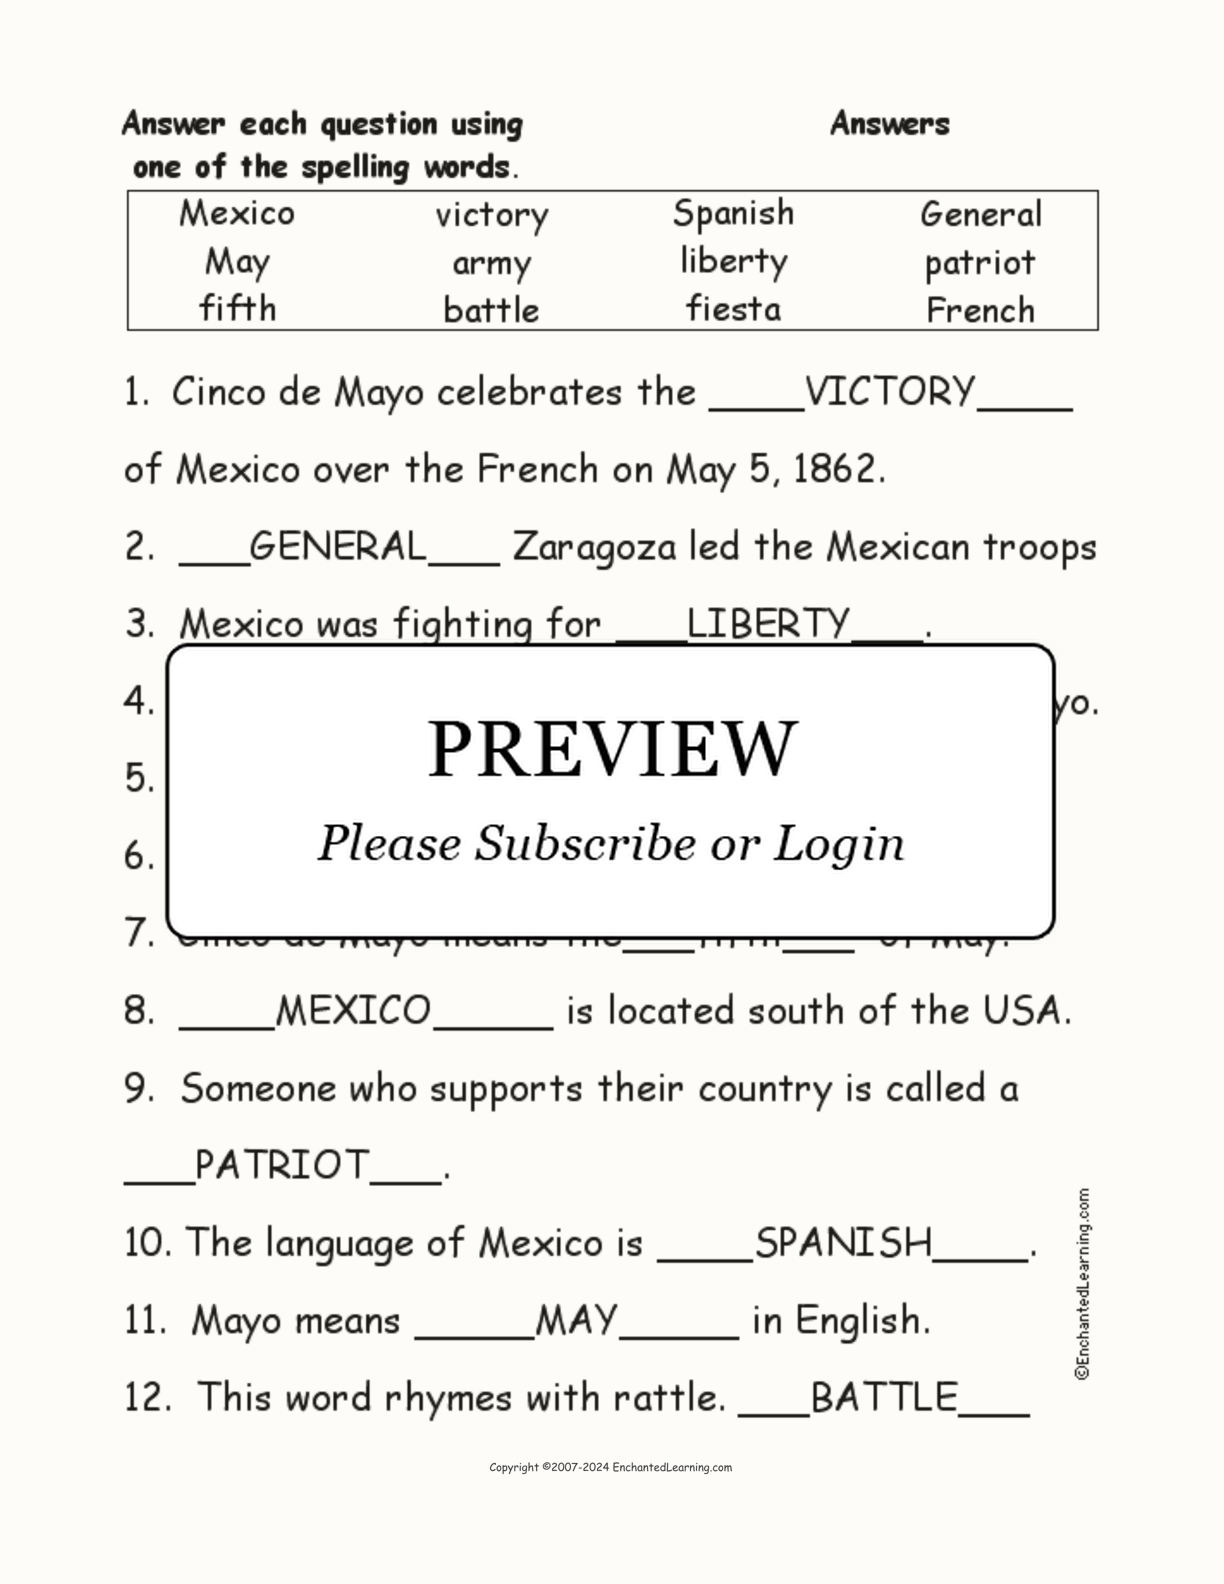 Cinco de Mayo Spelling Word Questions interactive worksheet page 2